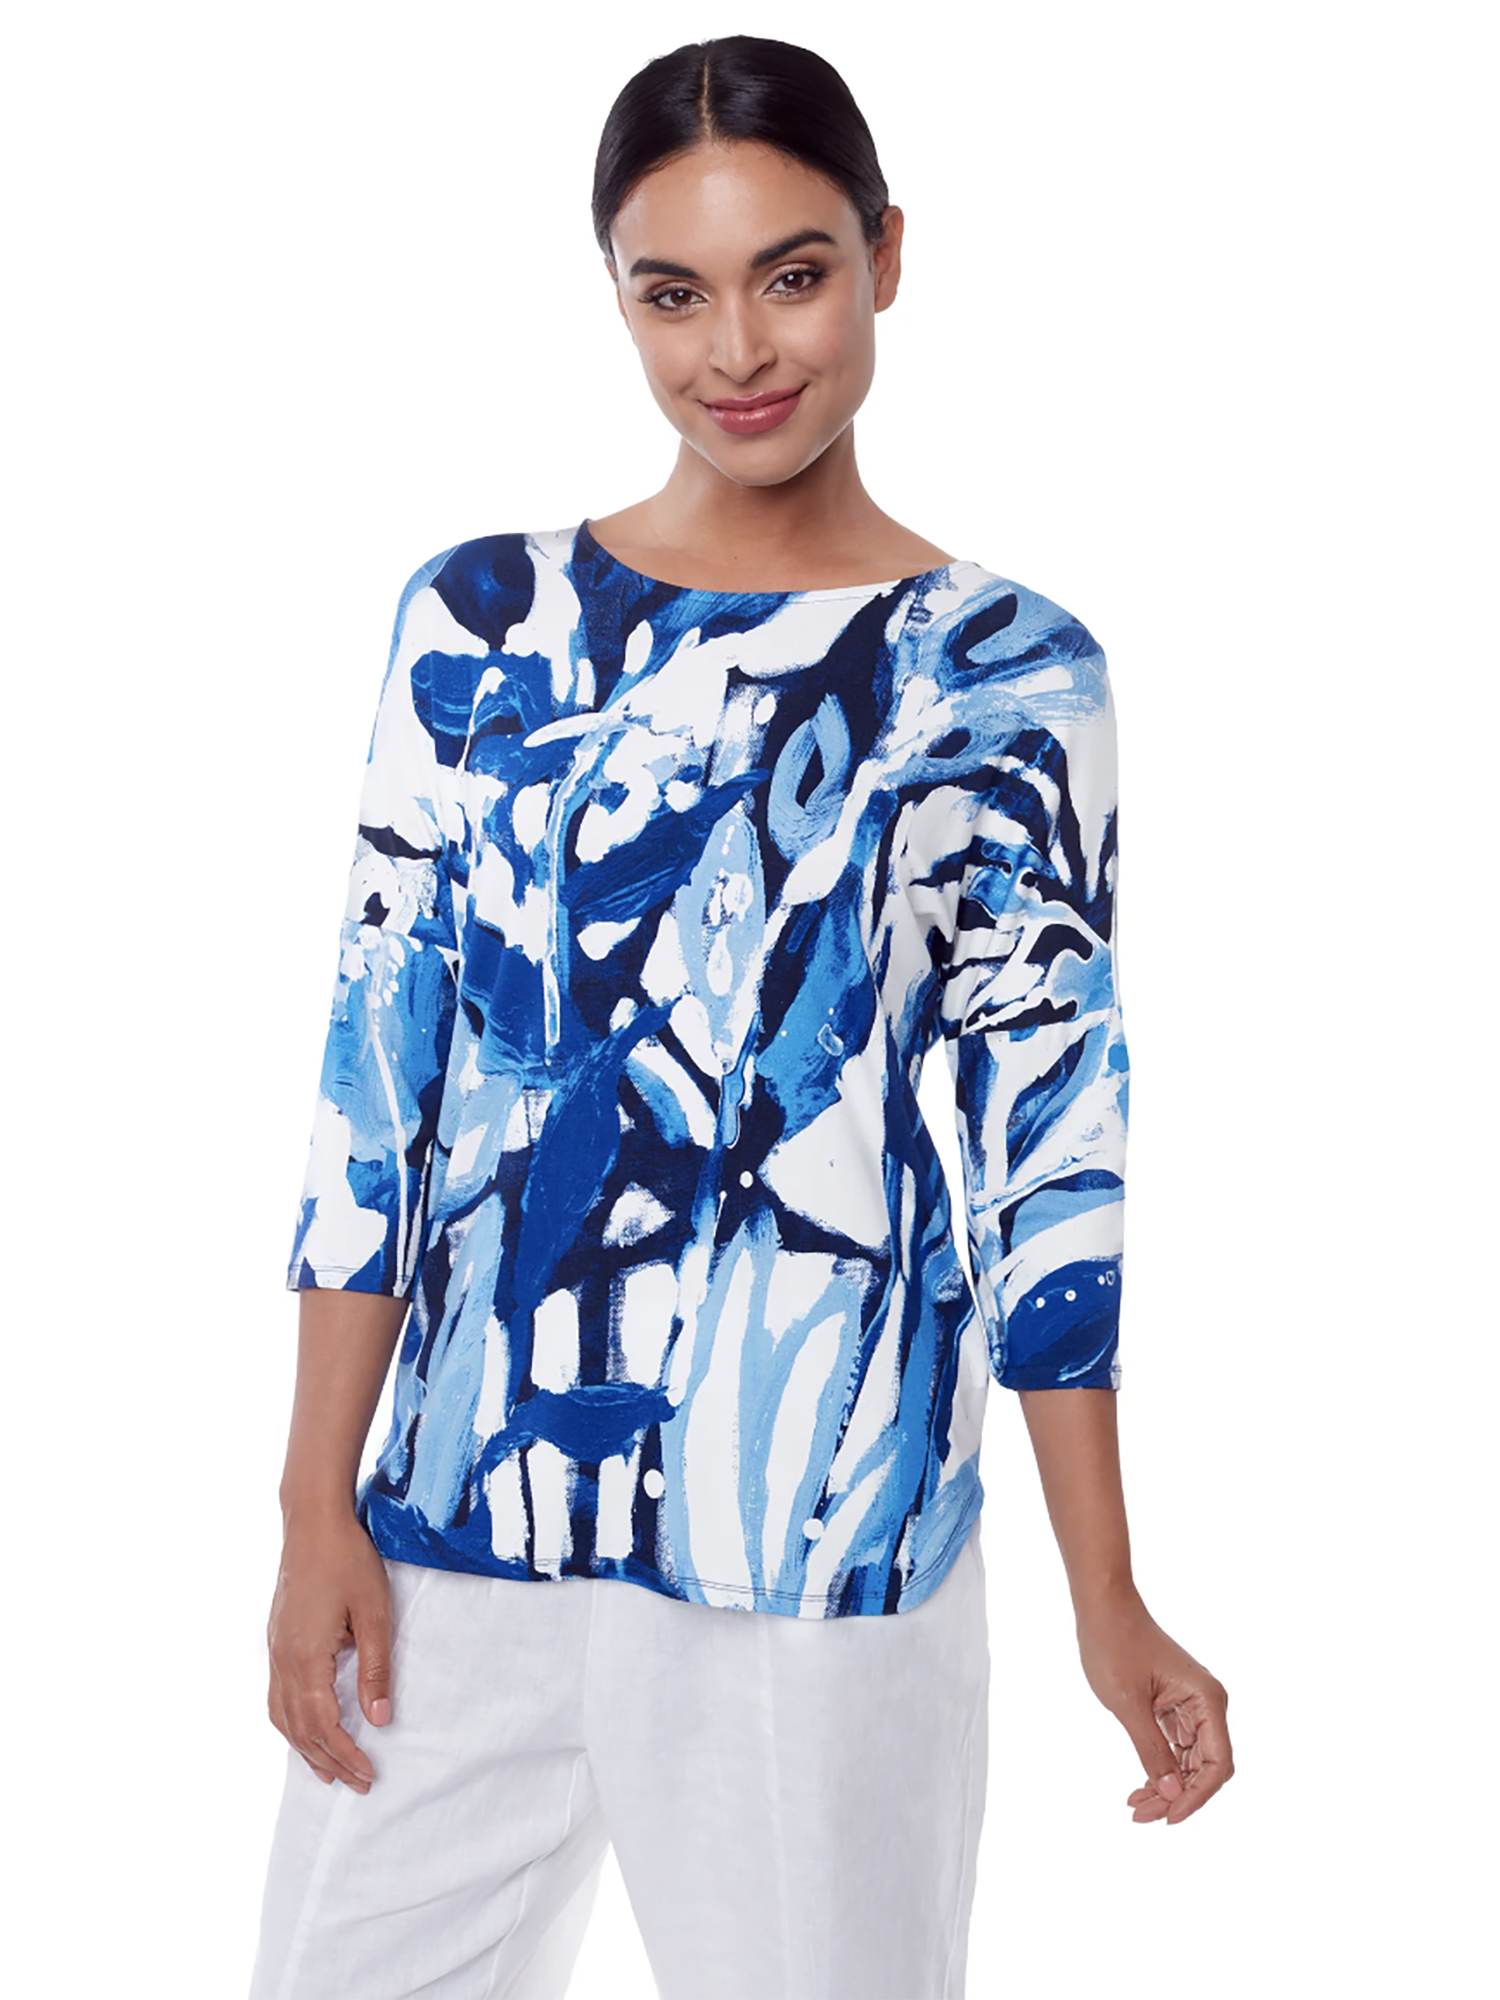 Claire Desjardins Blue And White At Liberty In the Garden 3/4 Length Dolman Sleeve Top - Tops